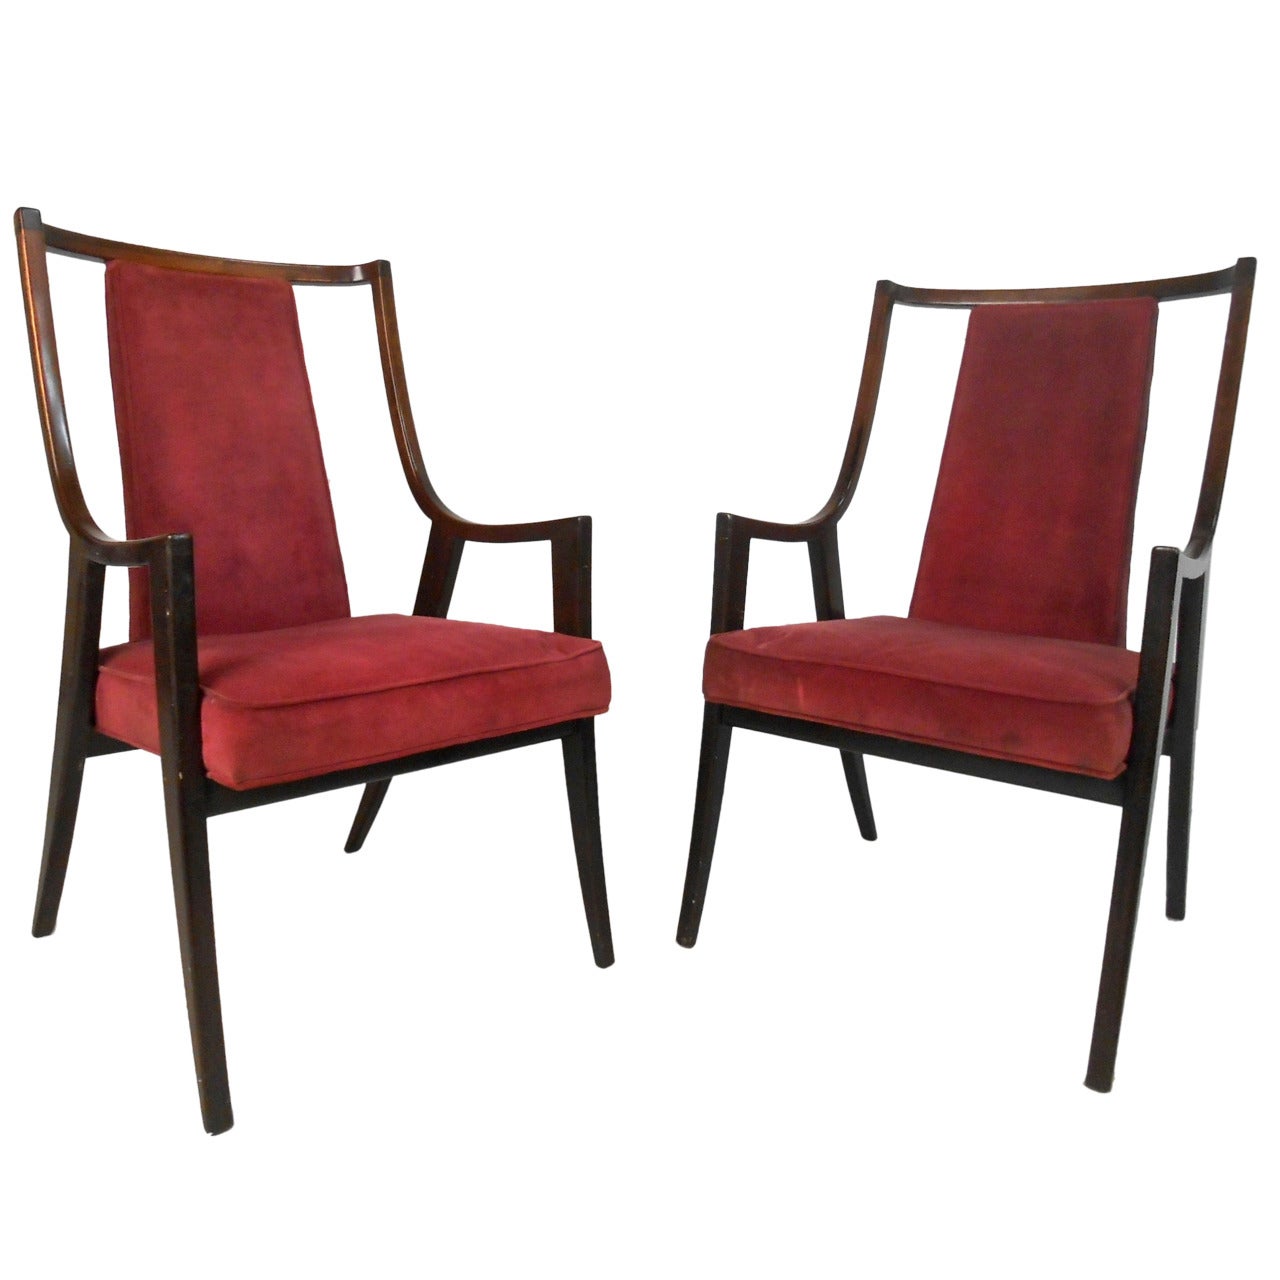 Pair of Mid-Century Modern Armchairs after T.H. Robsjohn-Gibbings